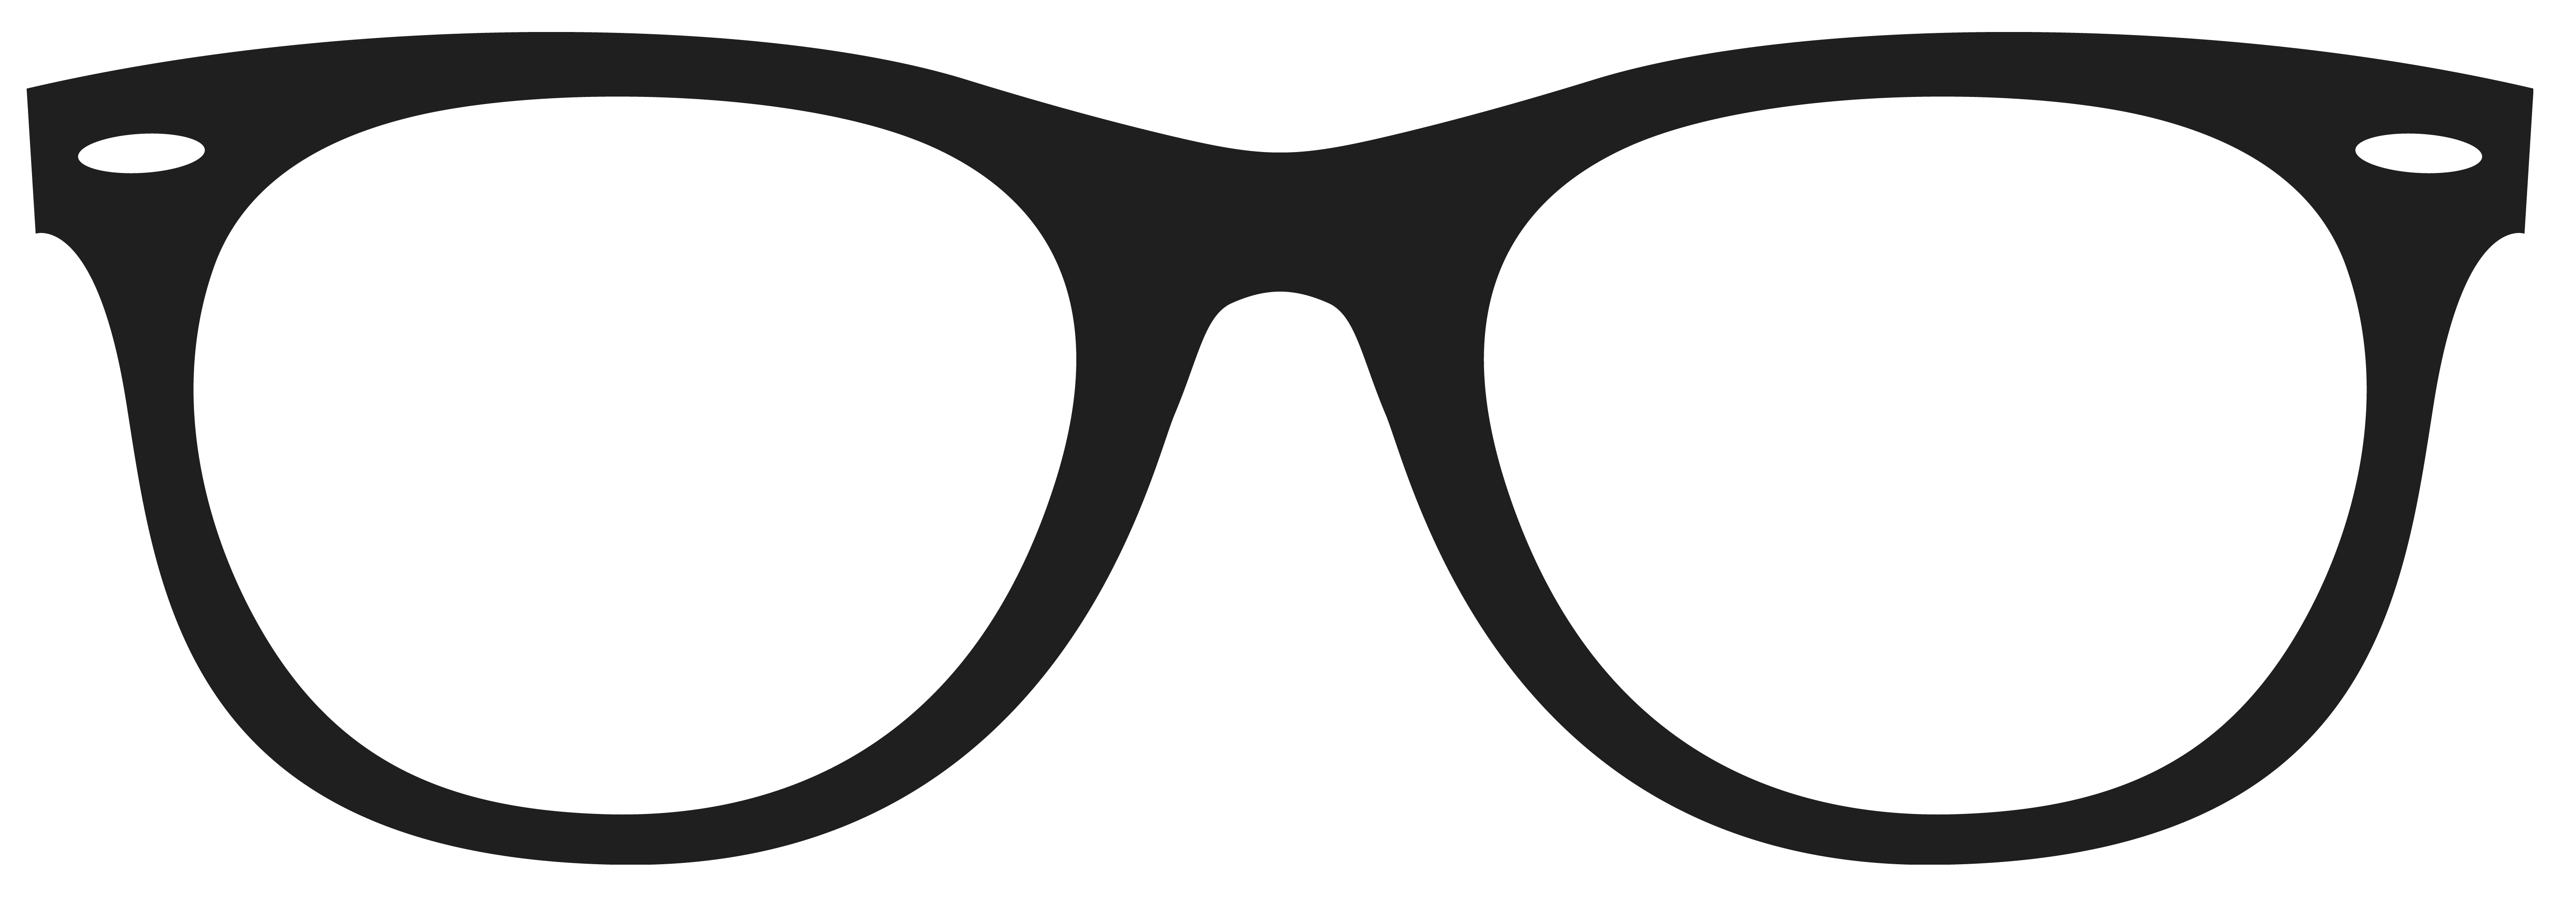 Glasses Png Hd Png Image - Glasses, Transparent background PNG HD thumbnail